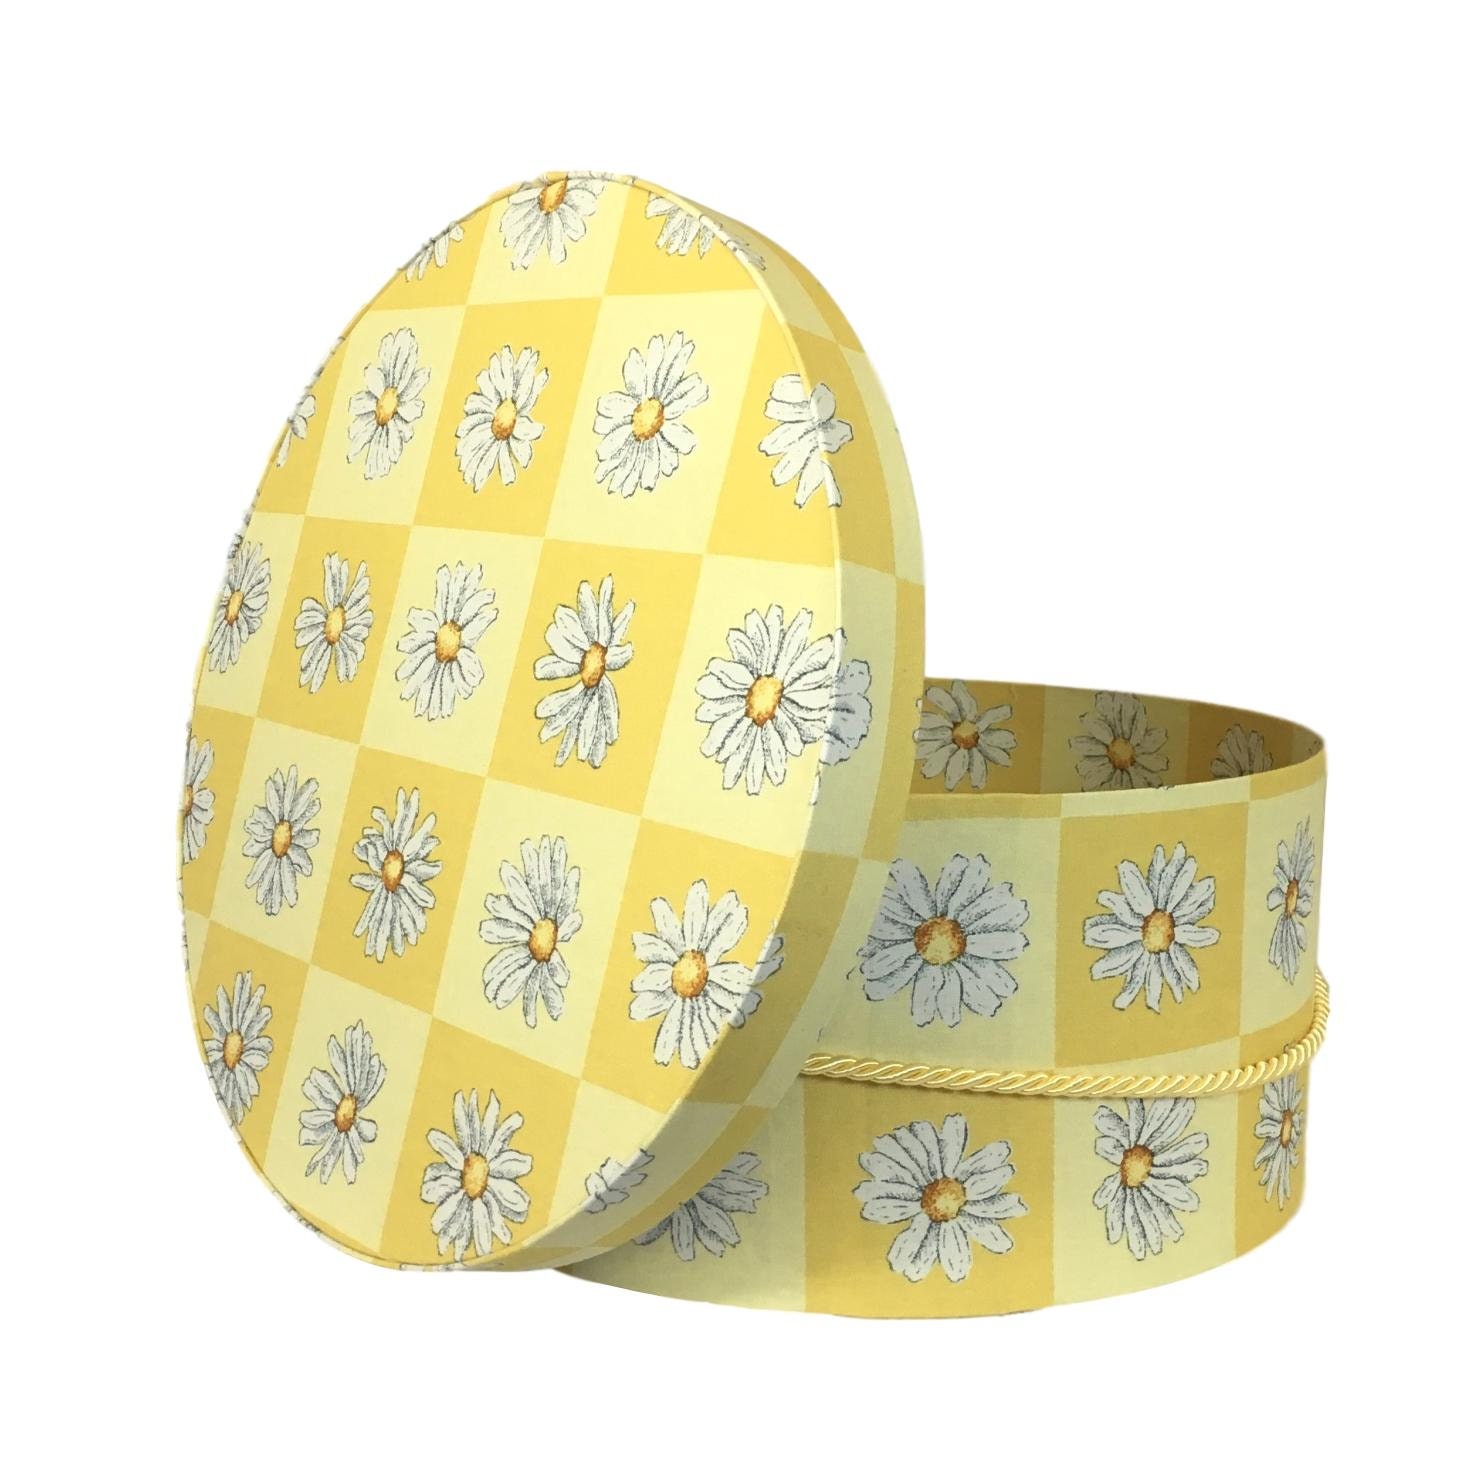 Large 15” Hat Box in Bright Yellow with Daisies Fabric